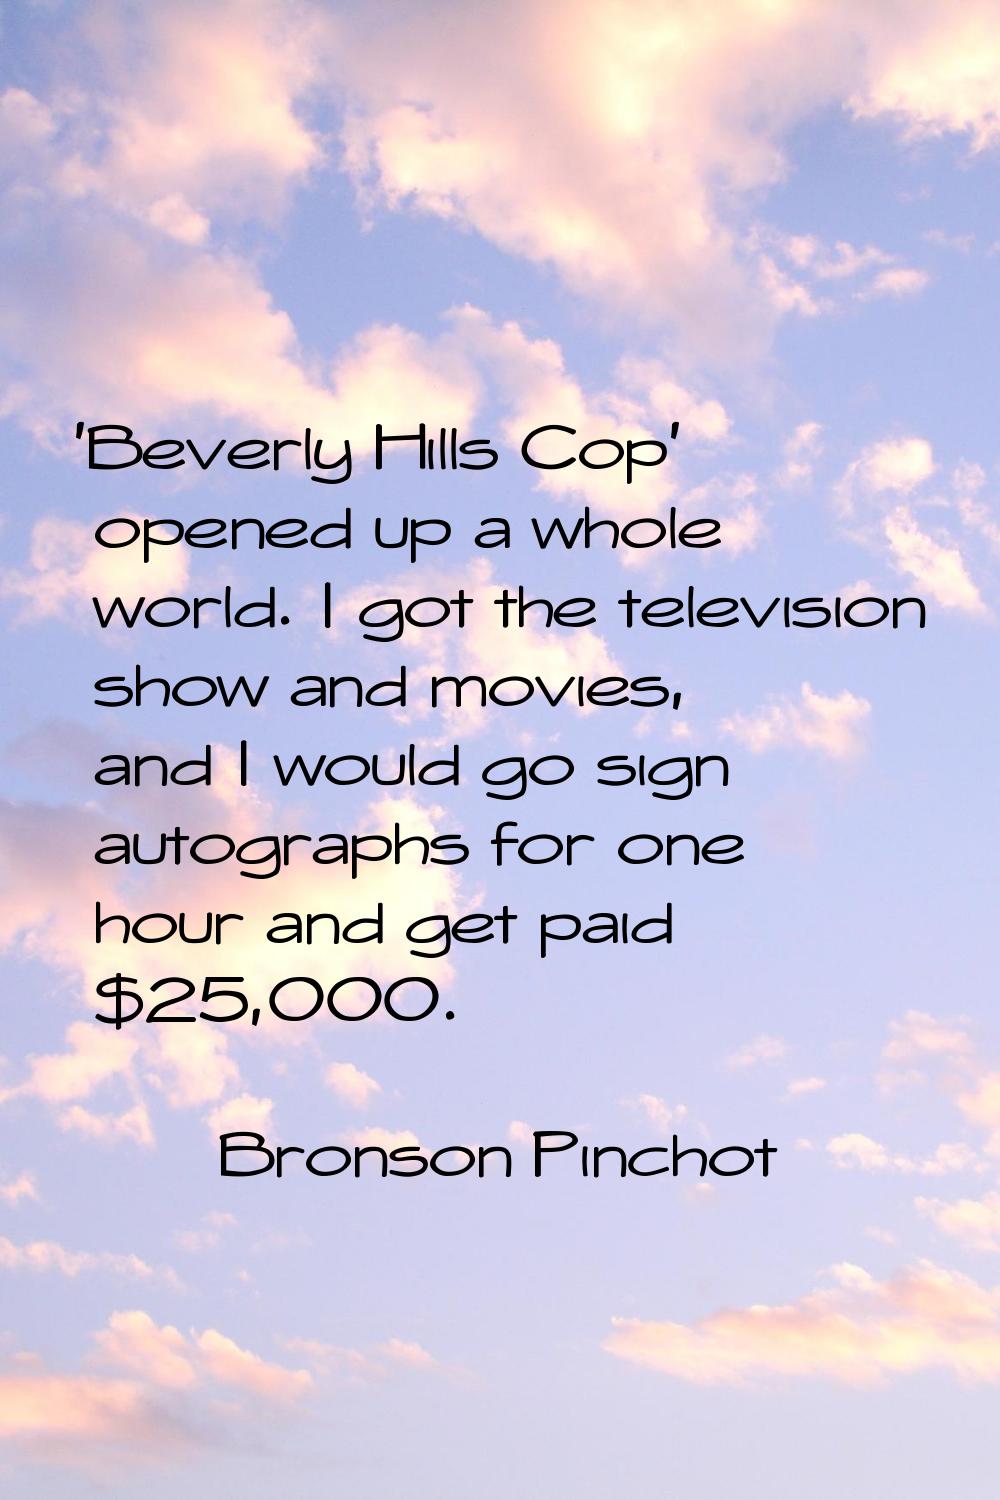 'Beverly Hills Cop' opened up a whole world. I got the television show and movies, and I would go s